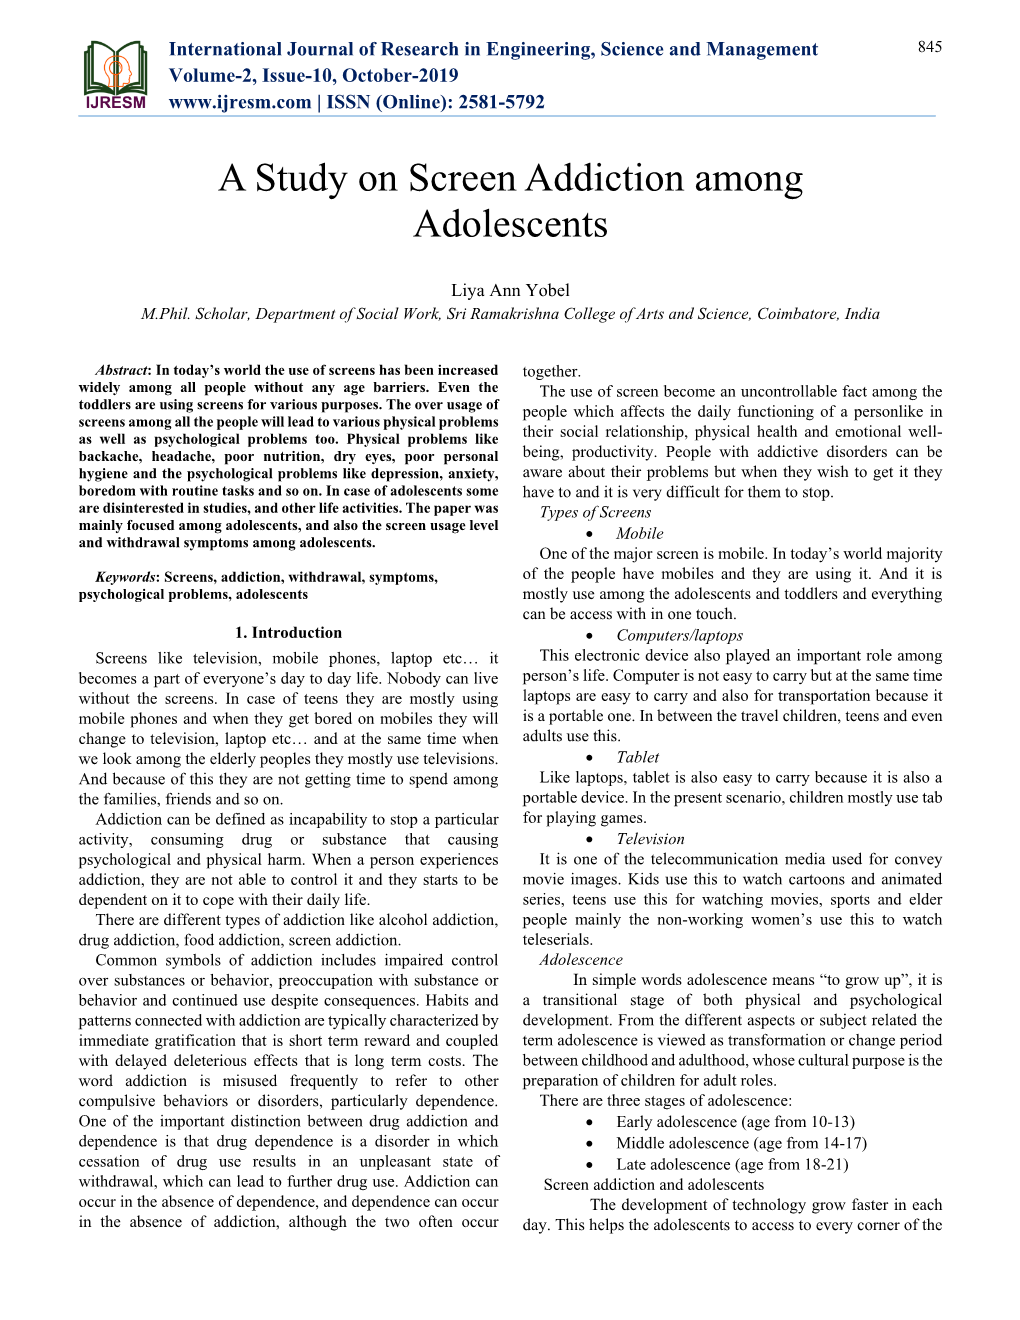 A Study on Screen Addiction Among Adolescents